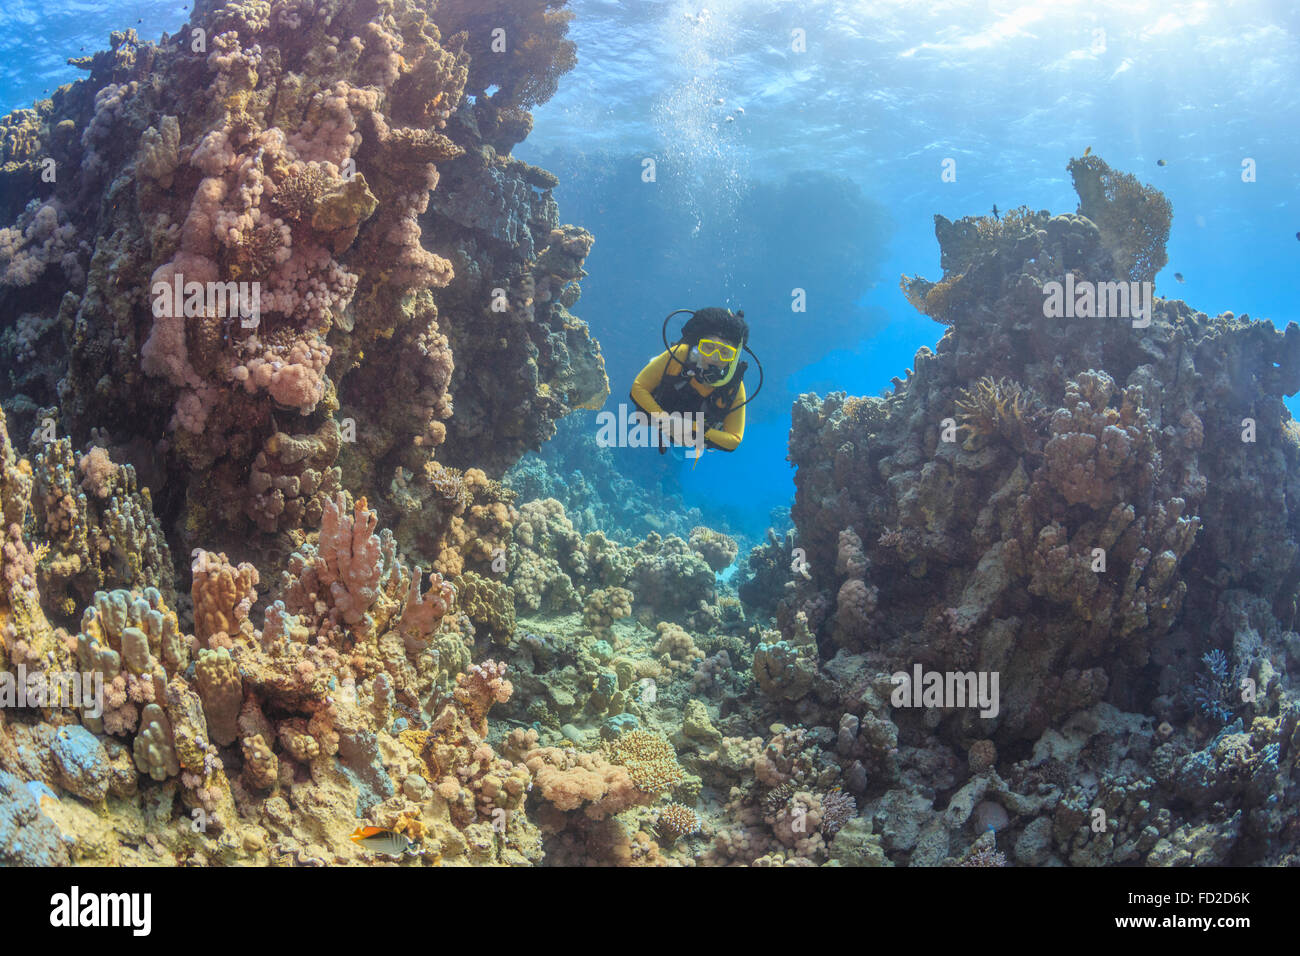 scuba, diver, diving, coral, sea, reef, red, tropical, underwater, fish, ocean, water, marine, egypt, nature, blue, divers, Stock Photo